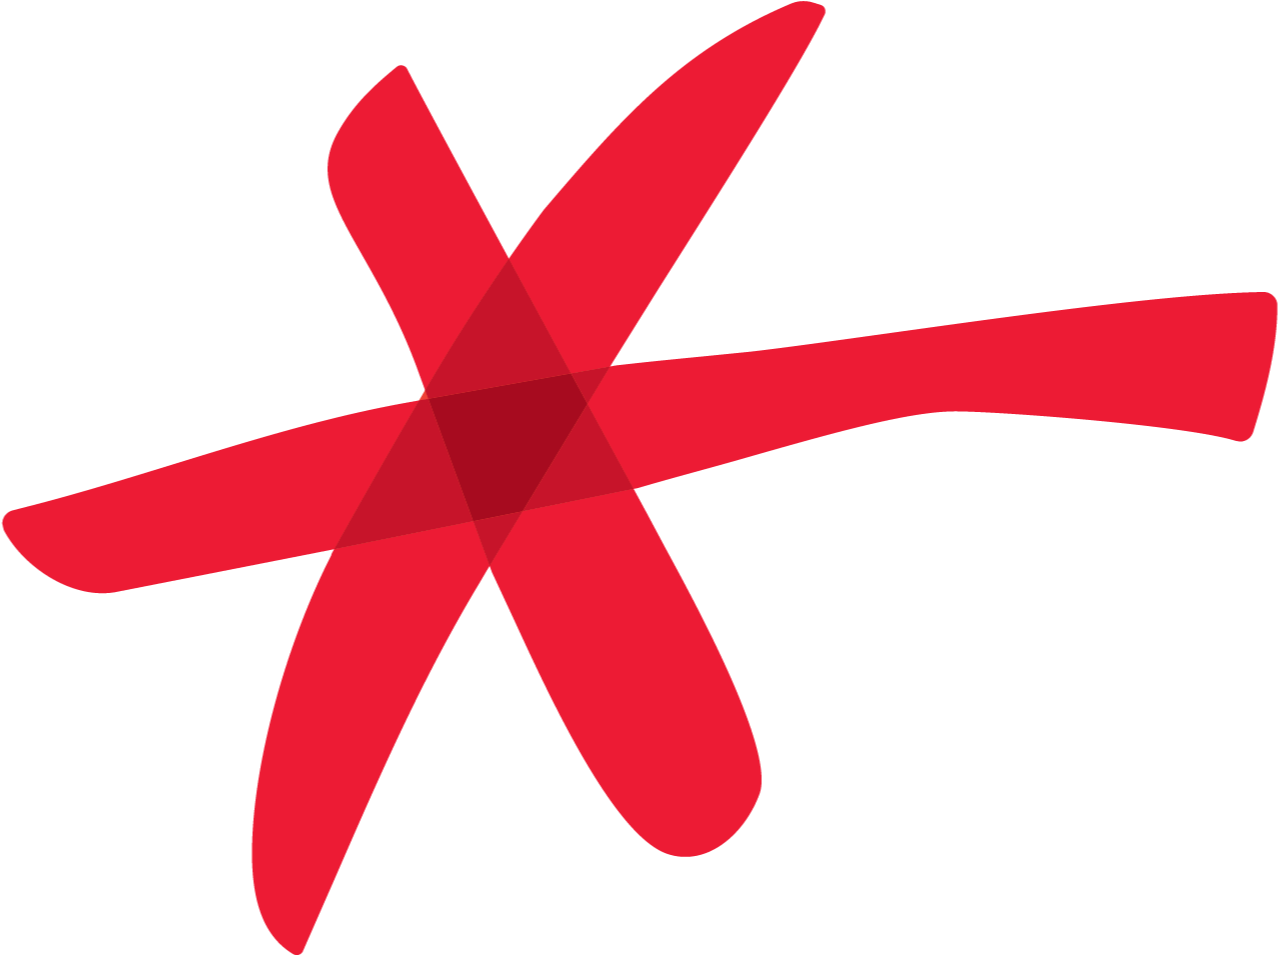 Asterisk PNG фон